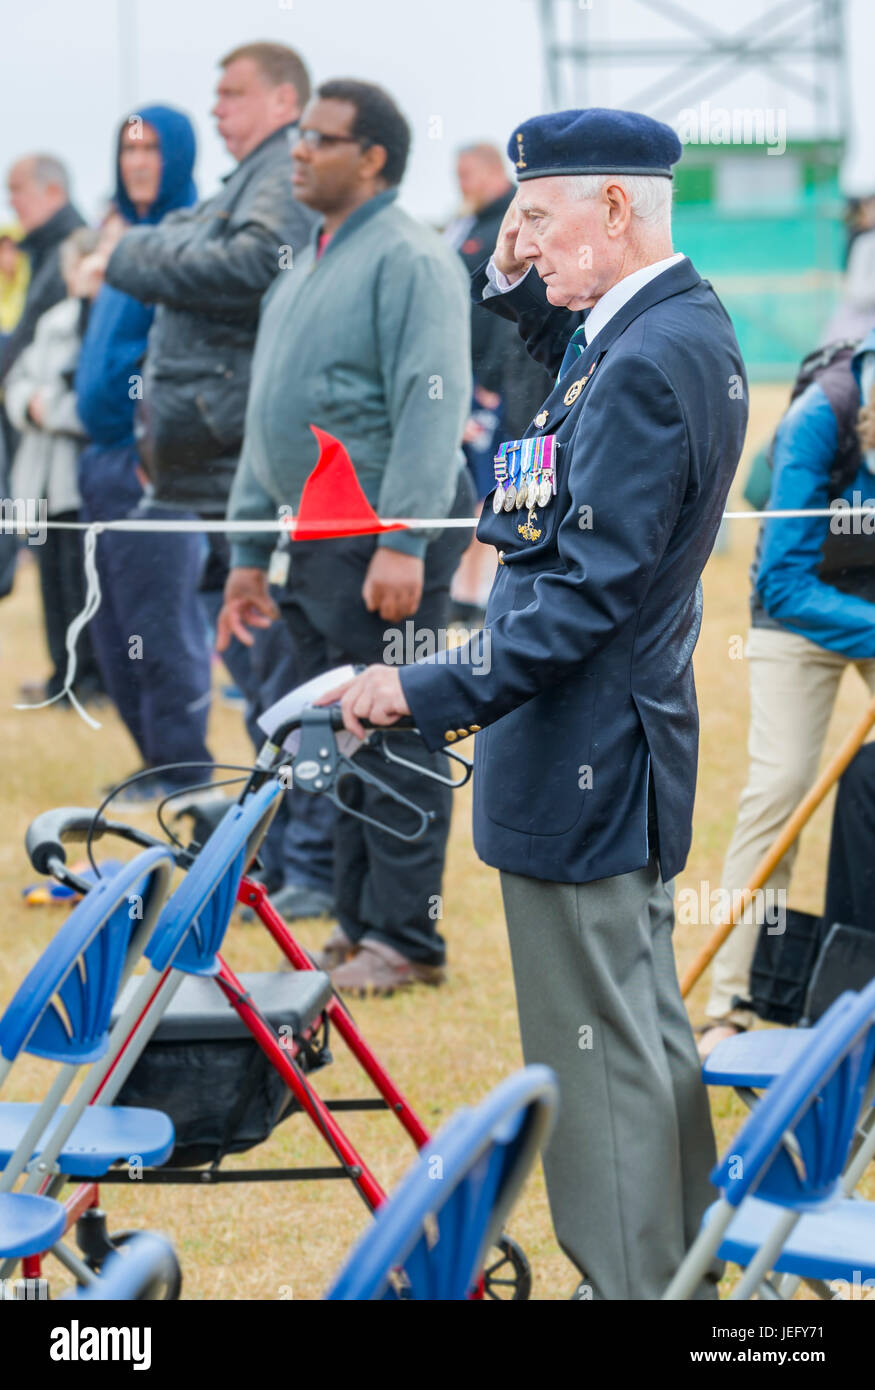 Veteran military officer giving a salute at the 2017 Armed Forces Day in Littlehampton, West Sussex, England, UK. Stock Photo